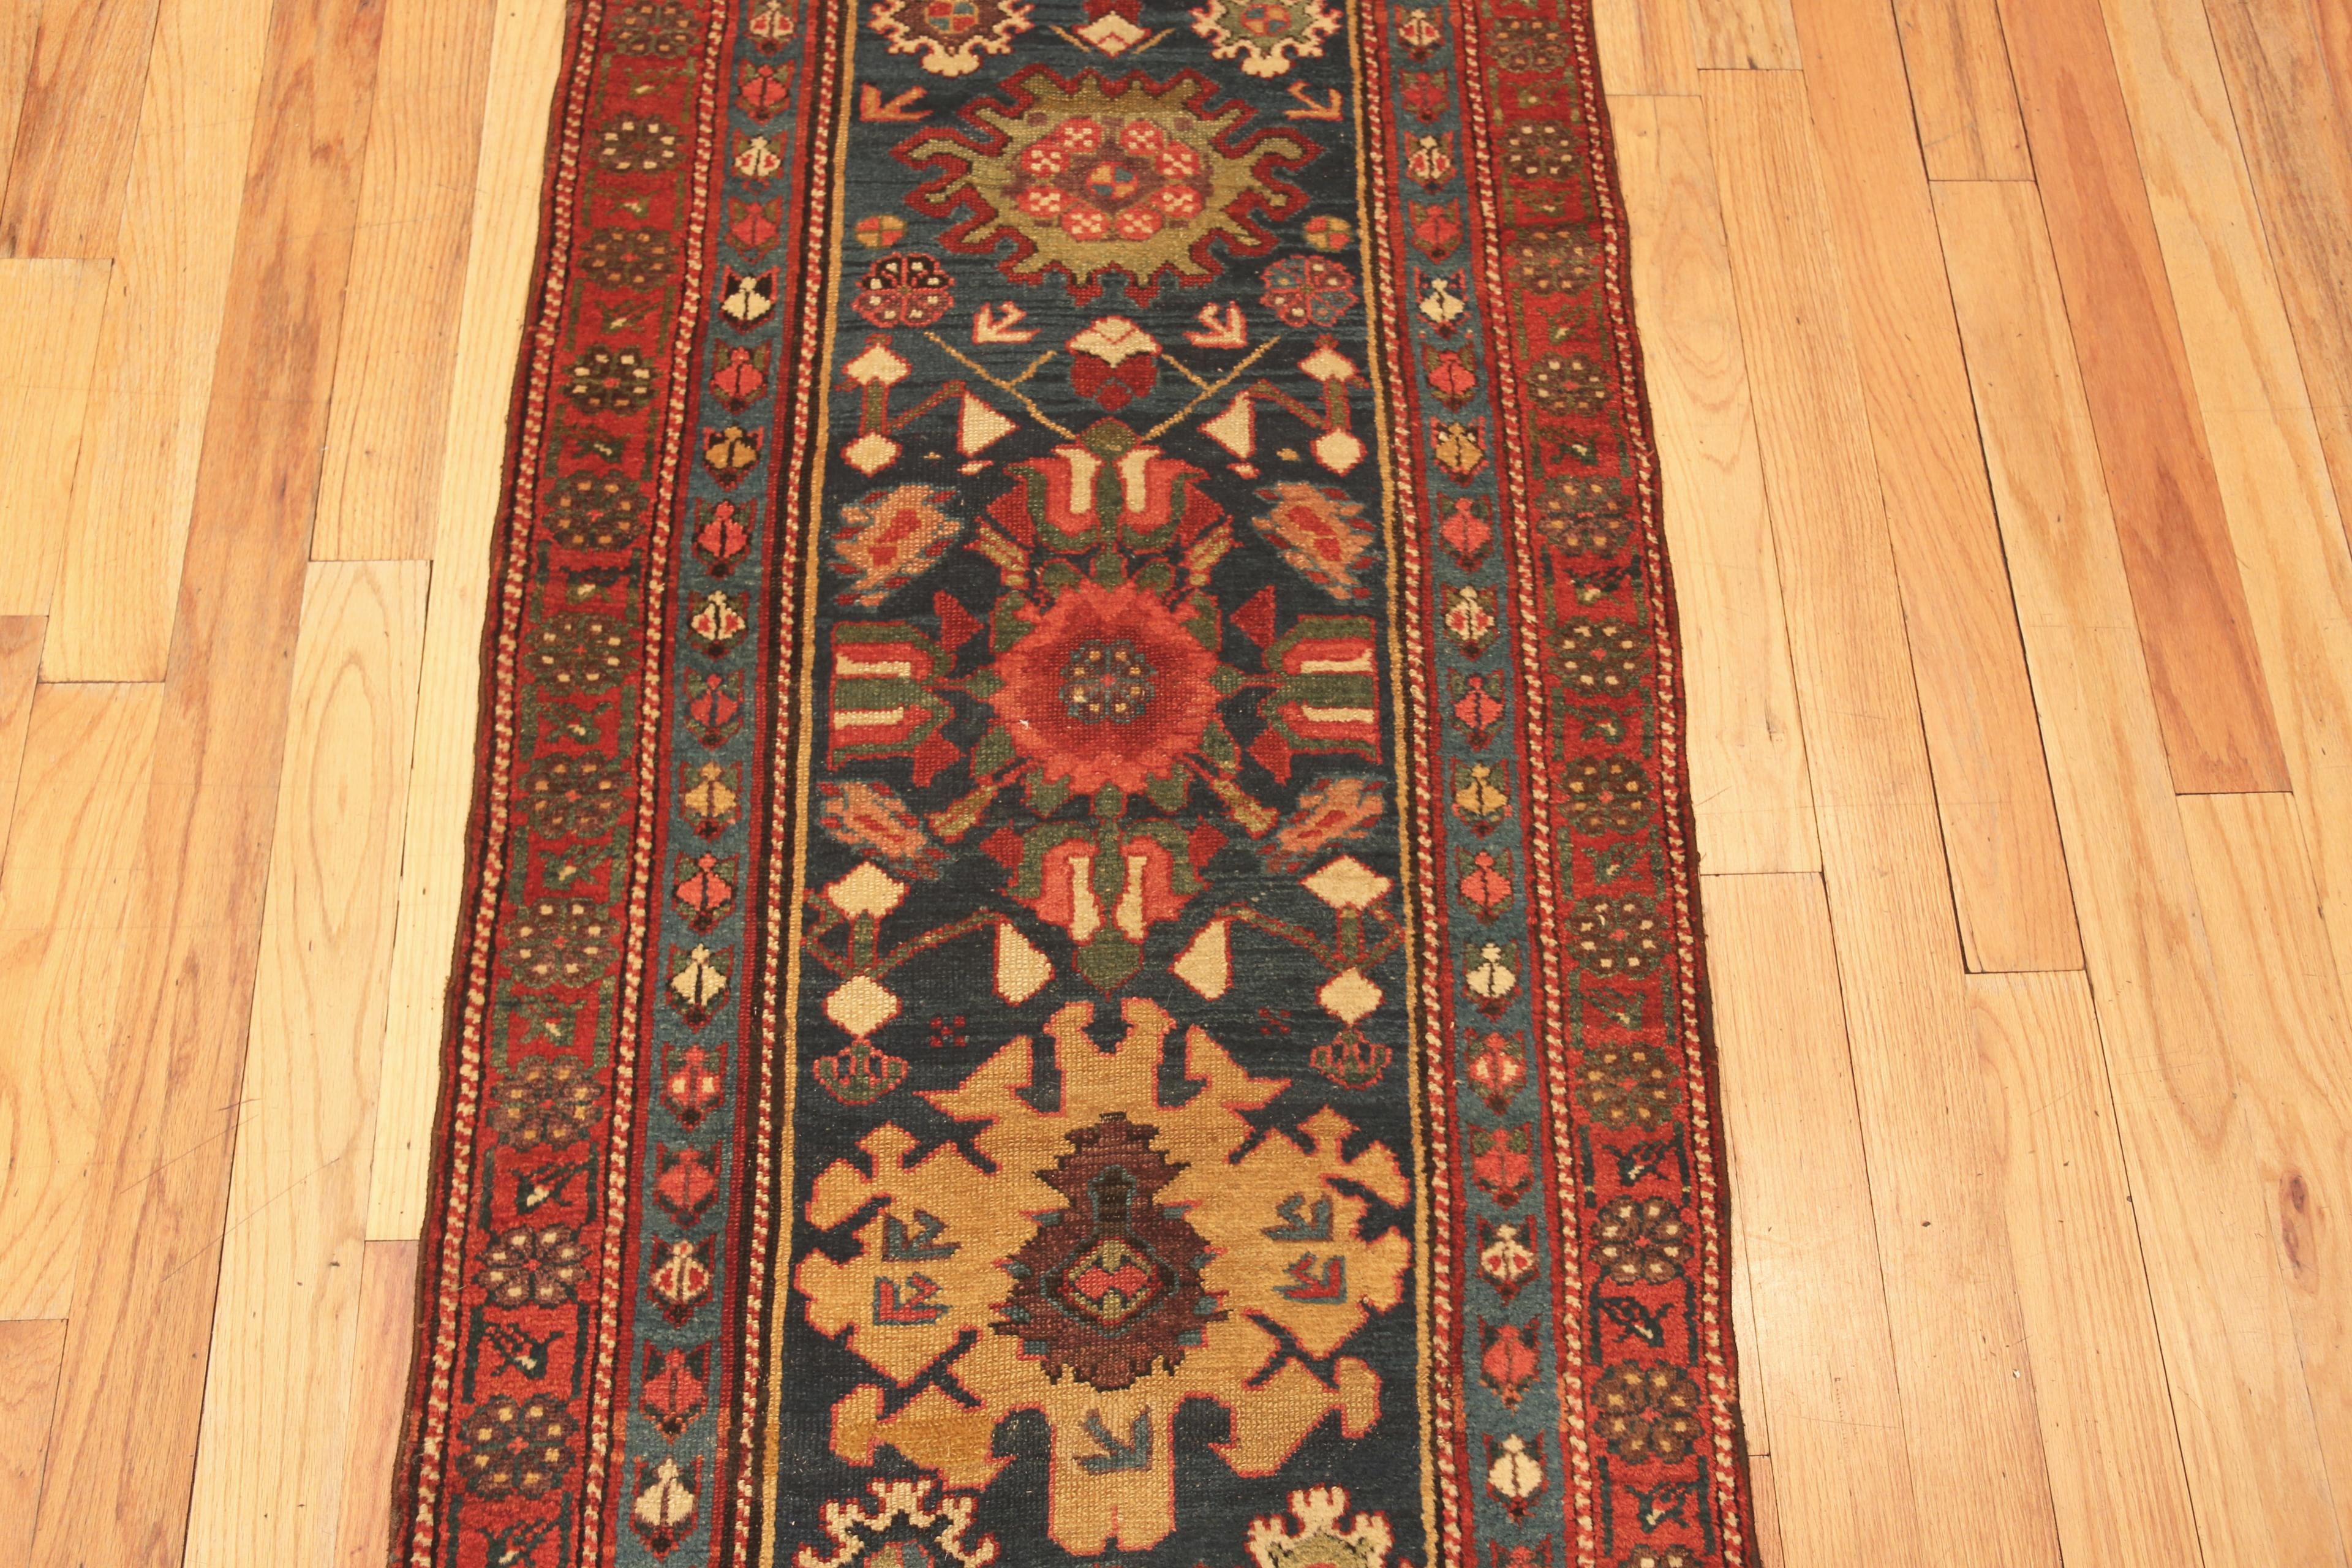 19th Century Antique Tribal North West Persian Hallway Runner Rug, Country of Origin: Persia, Circa date: 1880. Size: 2 ft 7 in x 18 ft (0.79 m x 5.49 m)
   